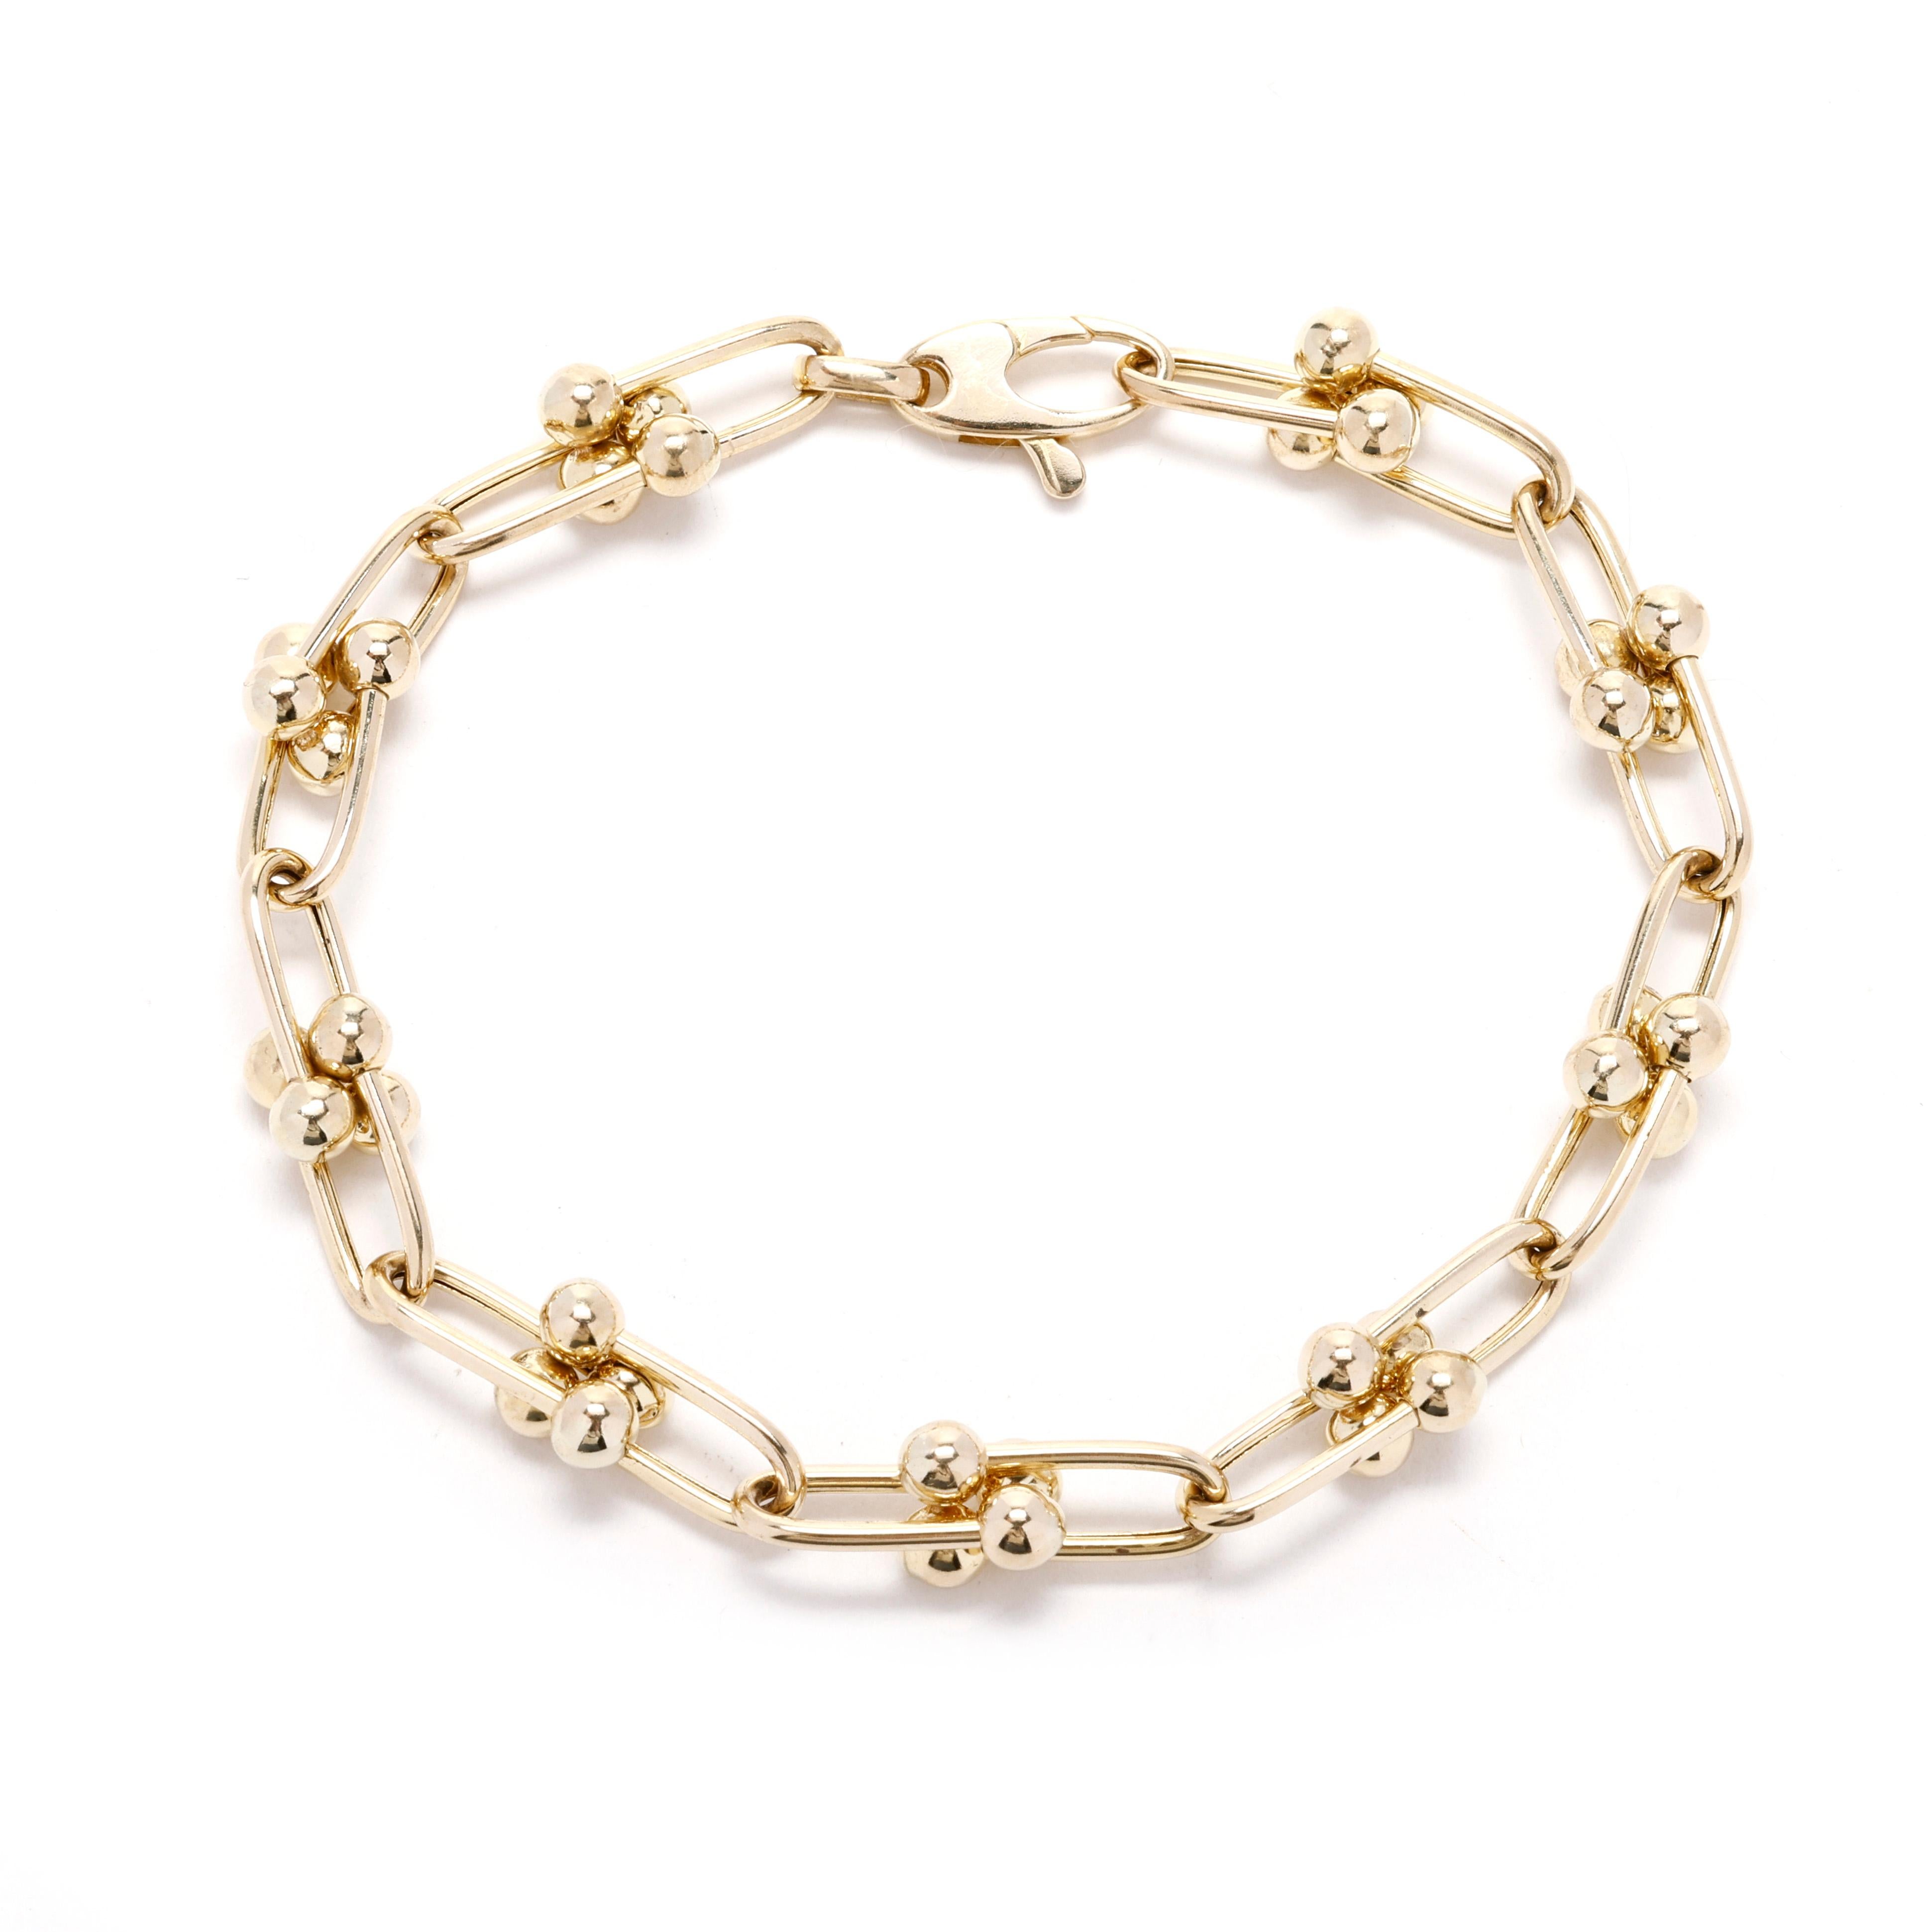 Elevate your everyday style with this elegant 14k Yellow Gold Link Bracelet. Crafted in luxurious 14k yellow gold, this classic link bracelet features a timeless design that is perfect for everyday wear, whether worn alone for a subtle touch of